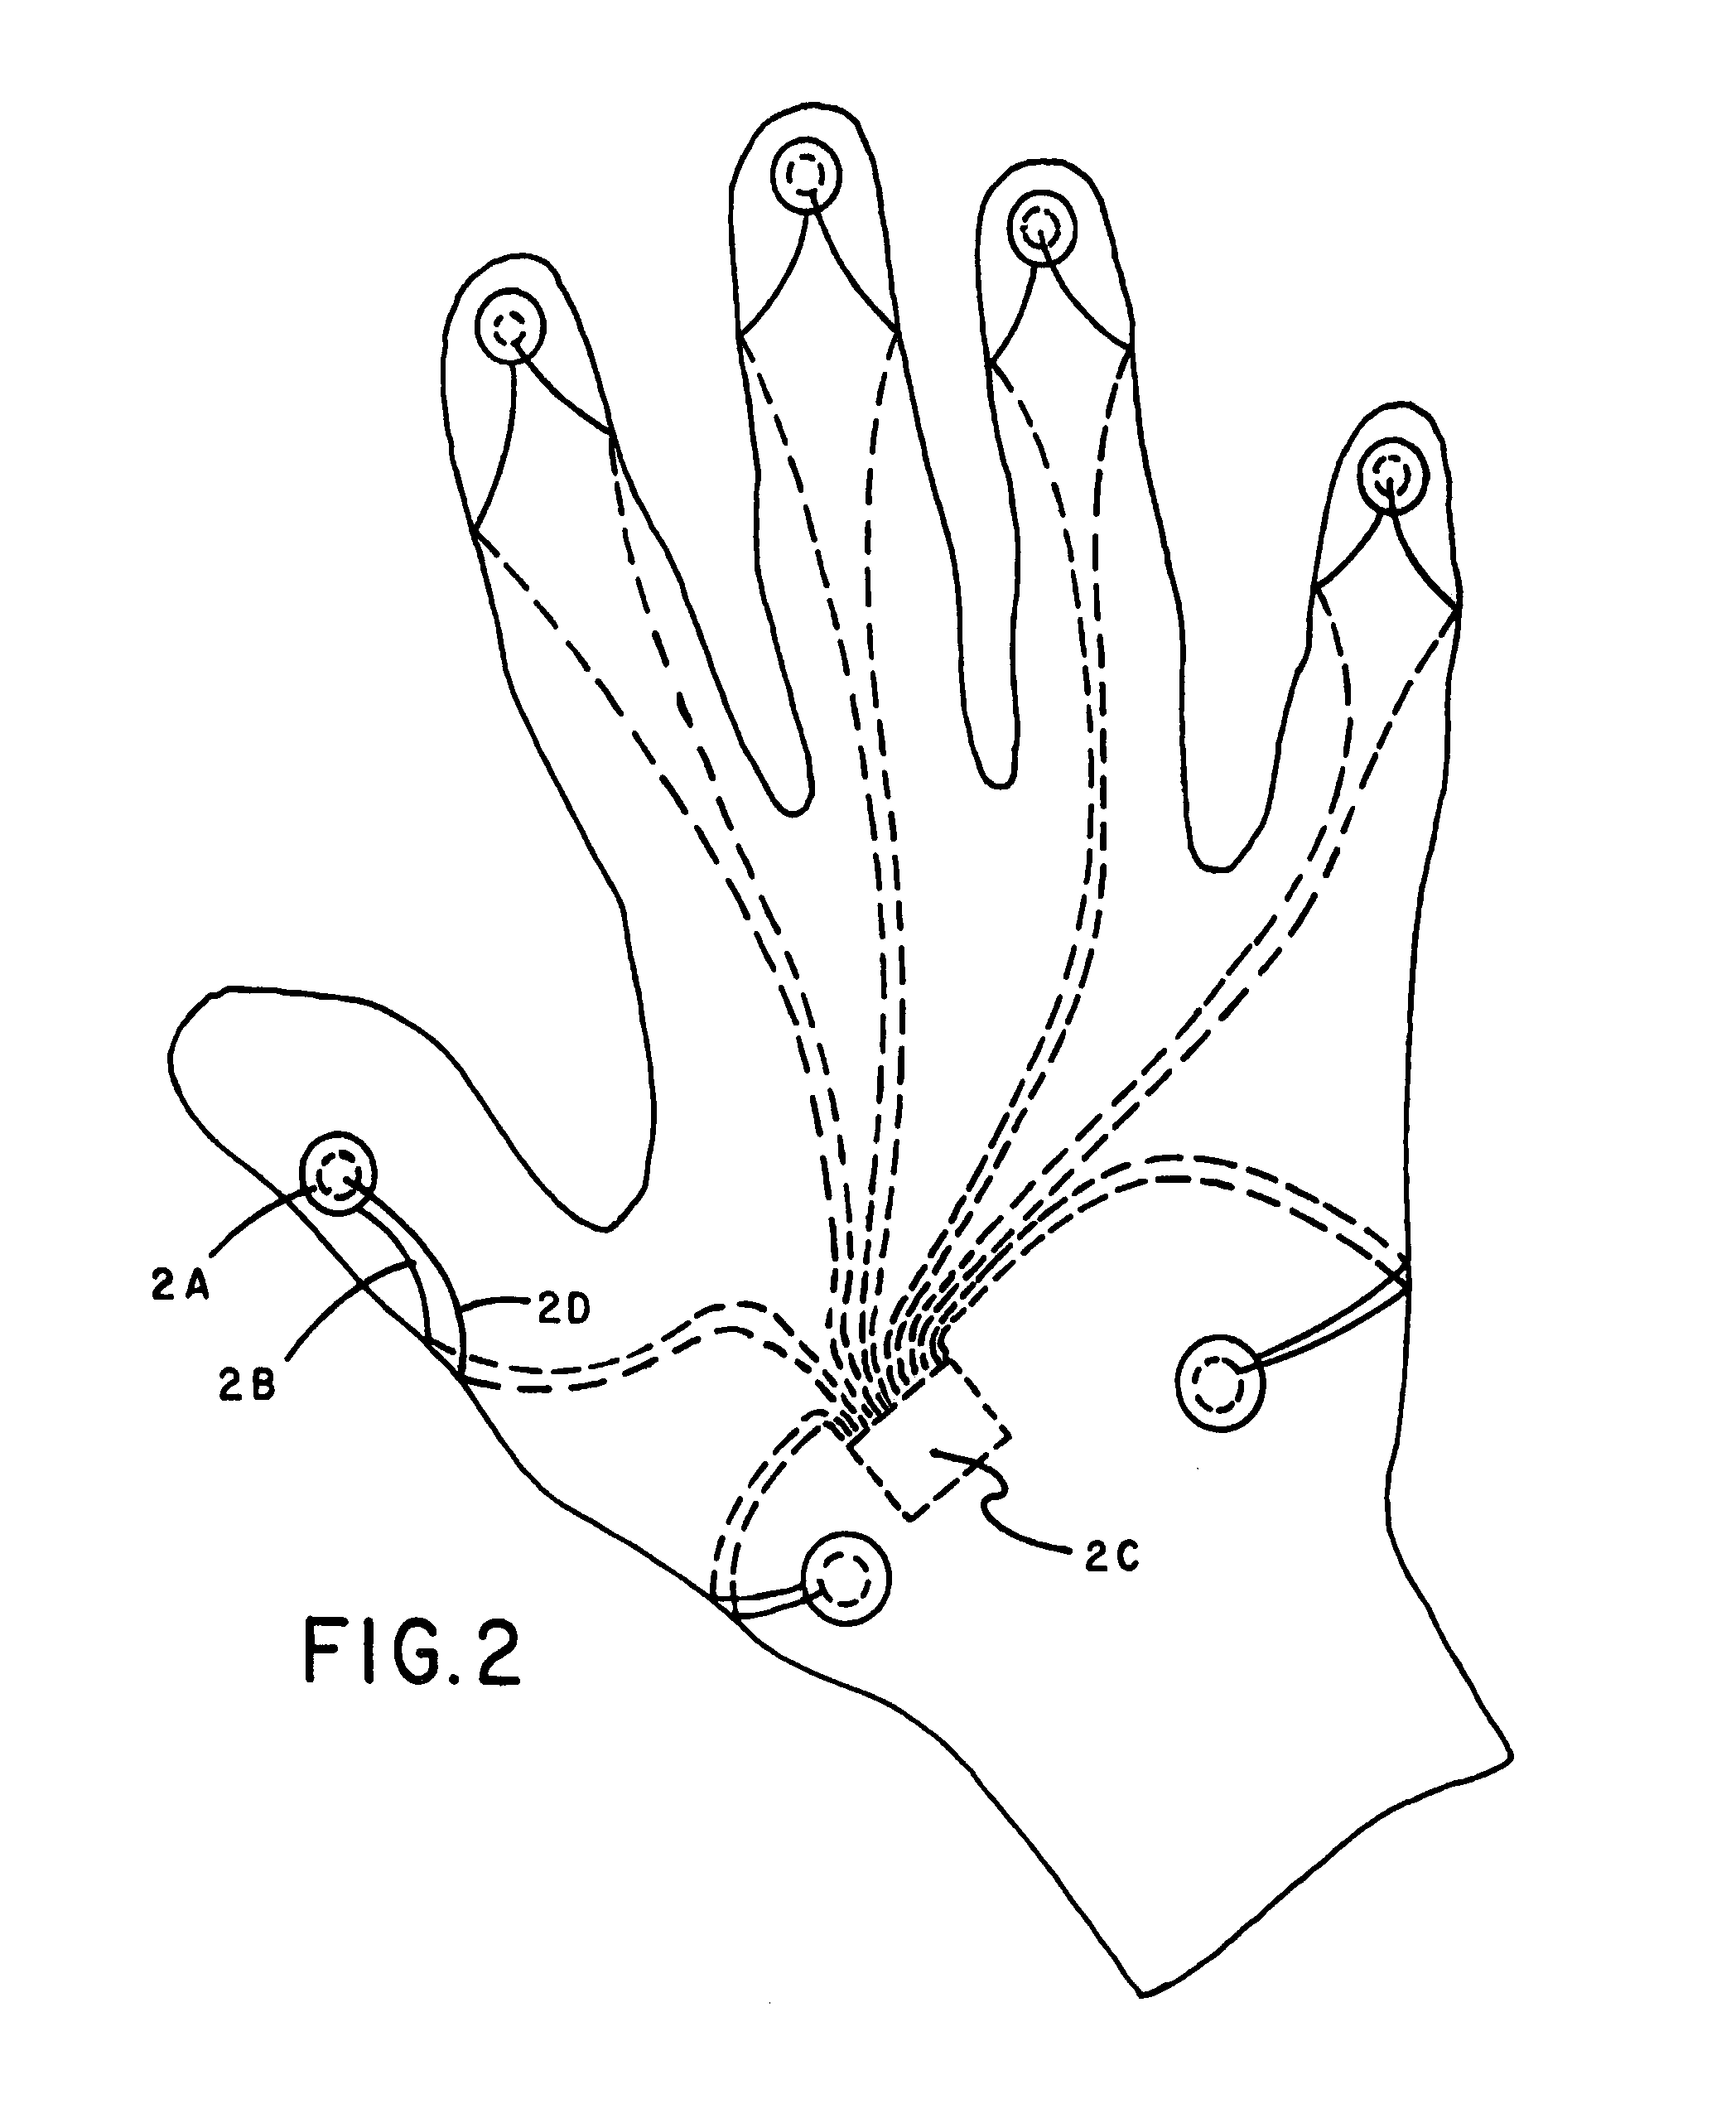 Touch sensitive impact controlled electronic signal transfer device